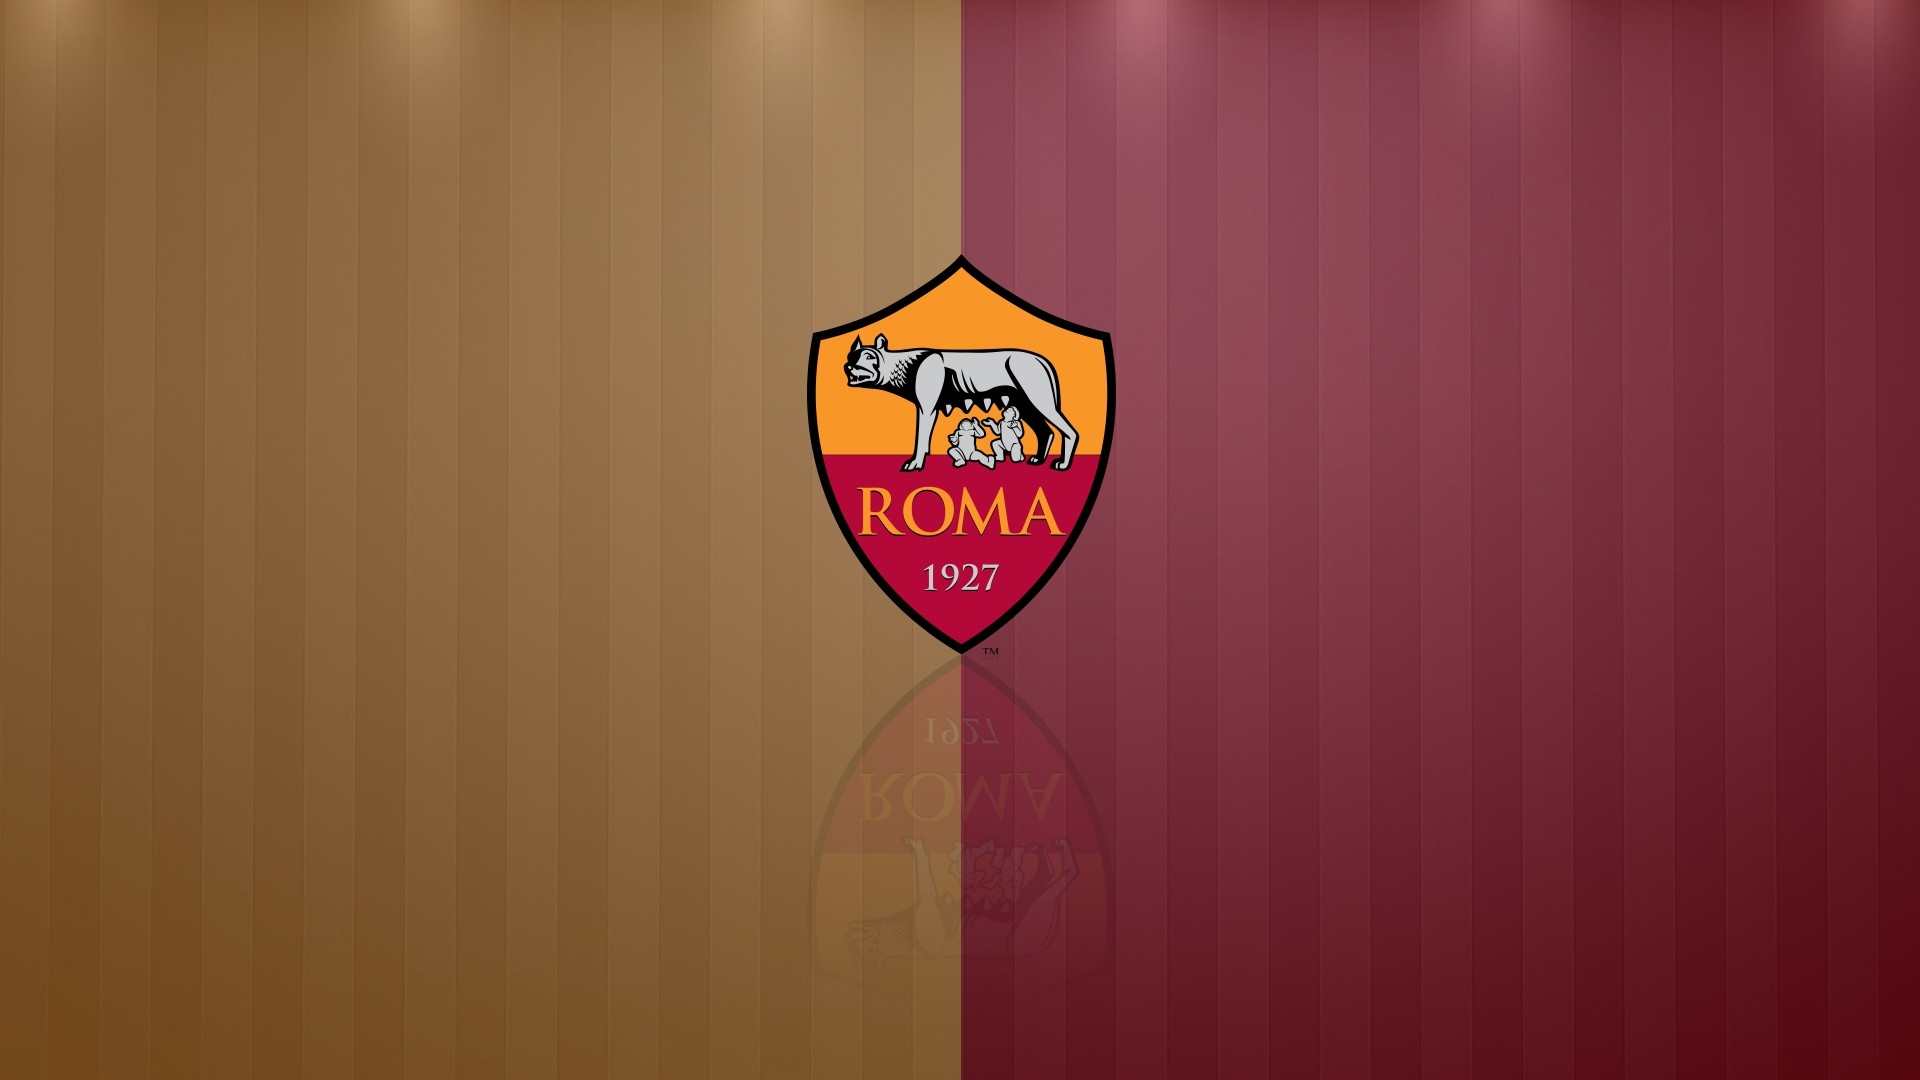 Windows Wallpaper AS Roma with high-resolution 1920x1080 pixel. You can use this wallpaper for your Desktop Computers, Mac Screensavers, Windows Backgrounds, iPhone Wallpapers, Tablet or Android Lock screen and another Mobile device